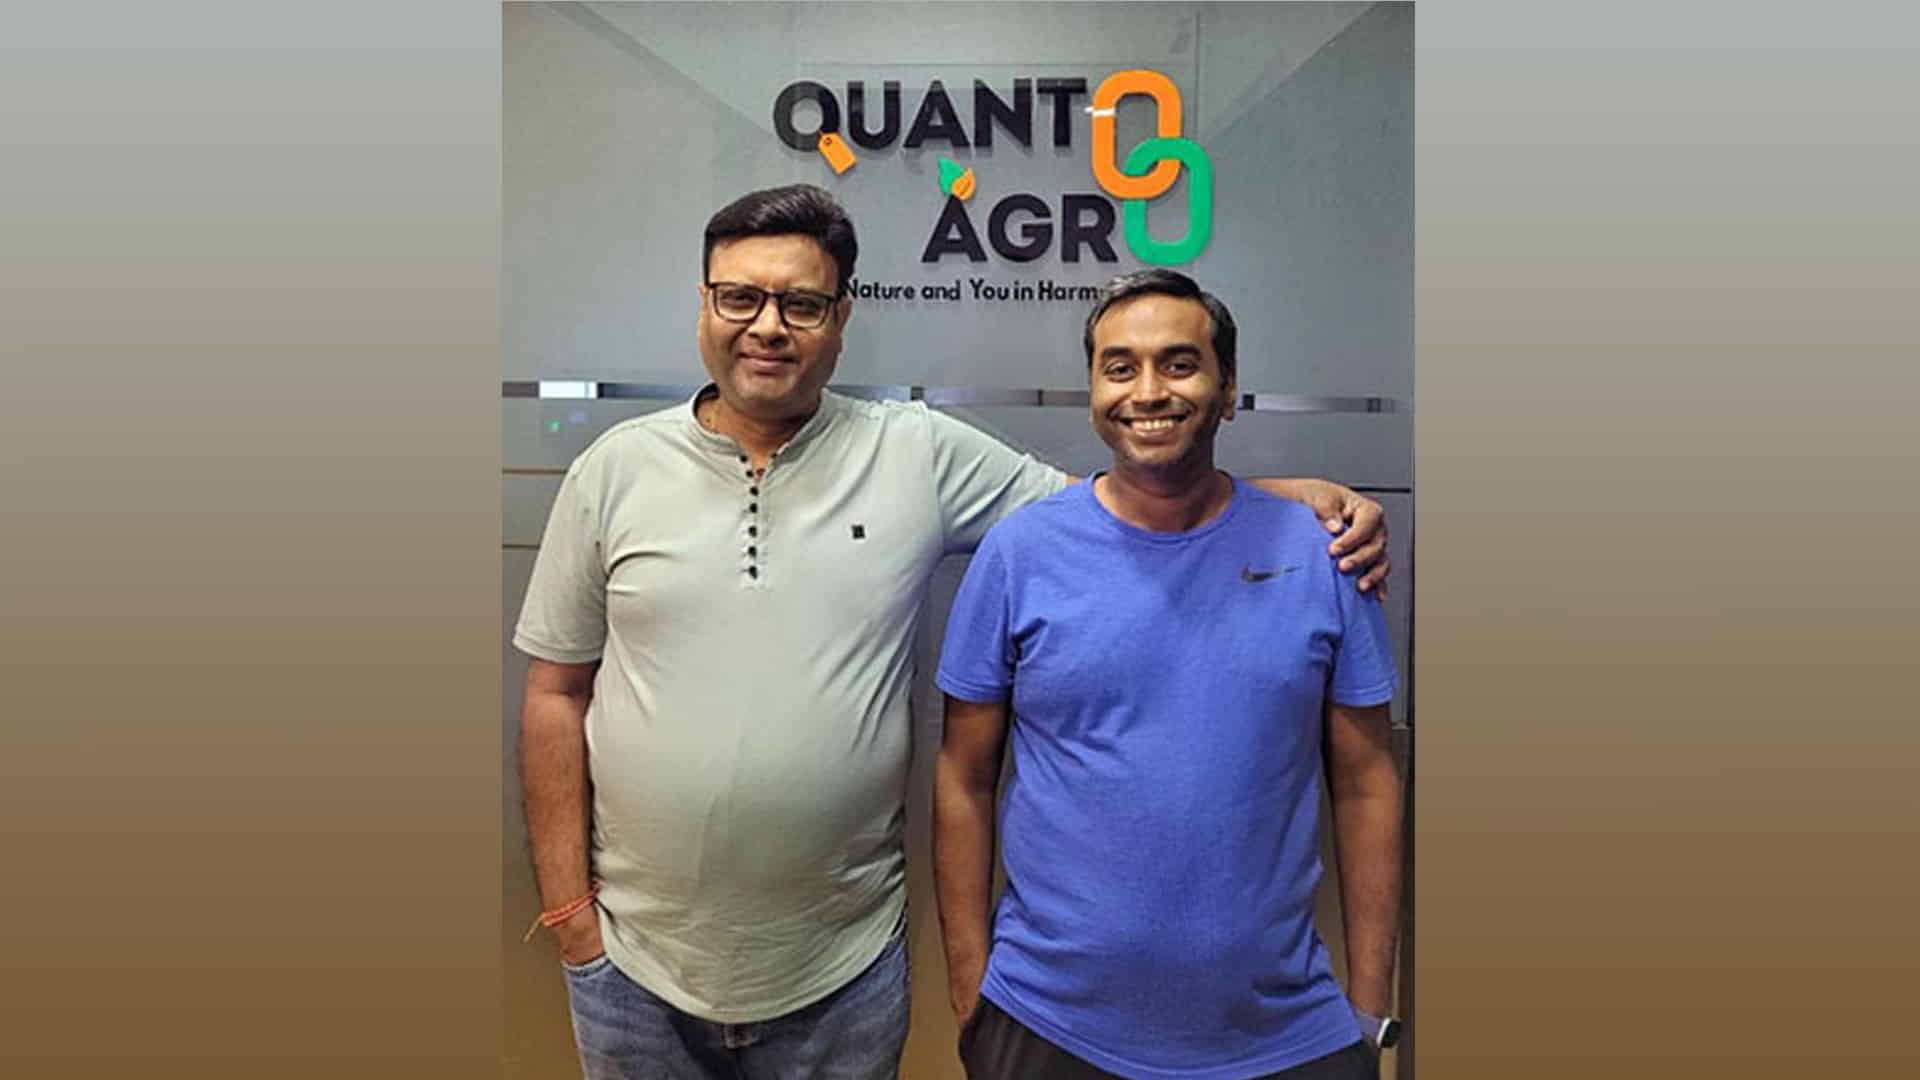 Indian Agro-Industry Start-up QuantoAgro Raises USD 650K to Expand Sustainable Essential Oils Business